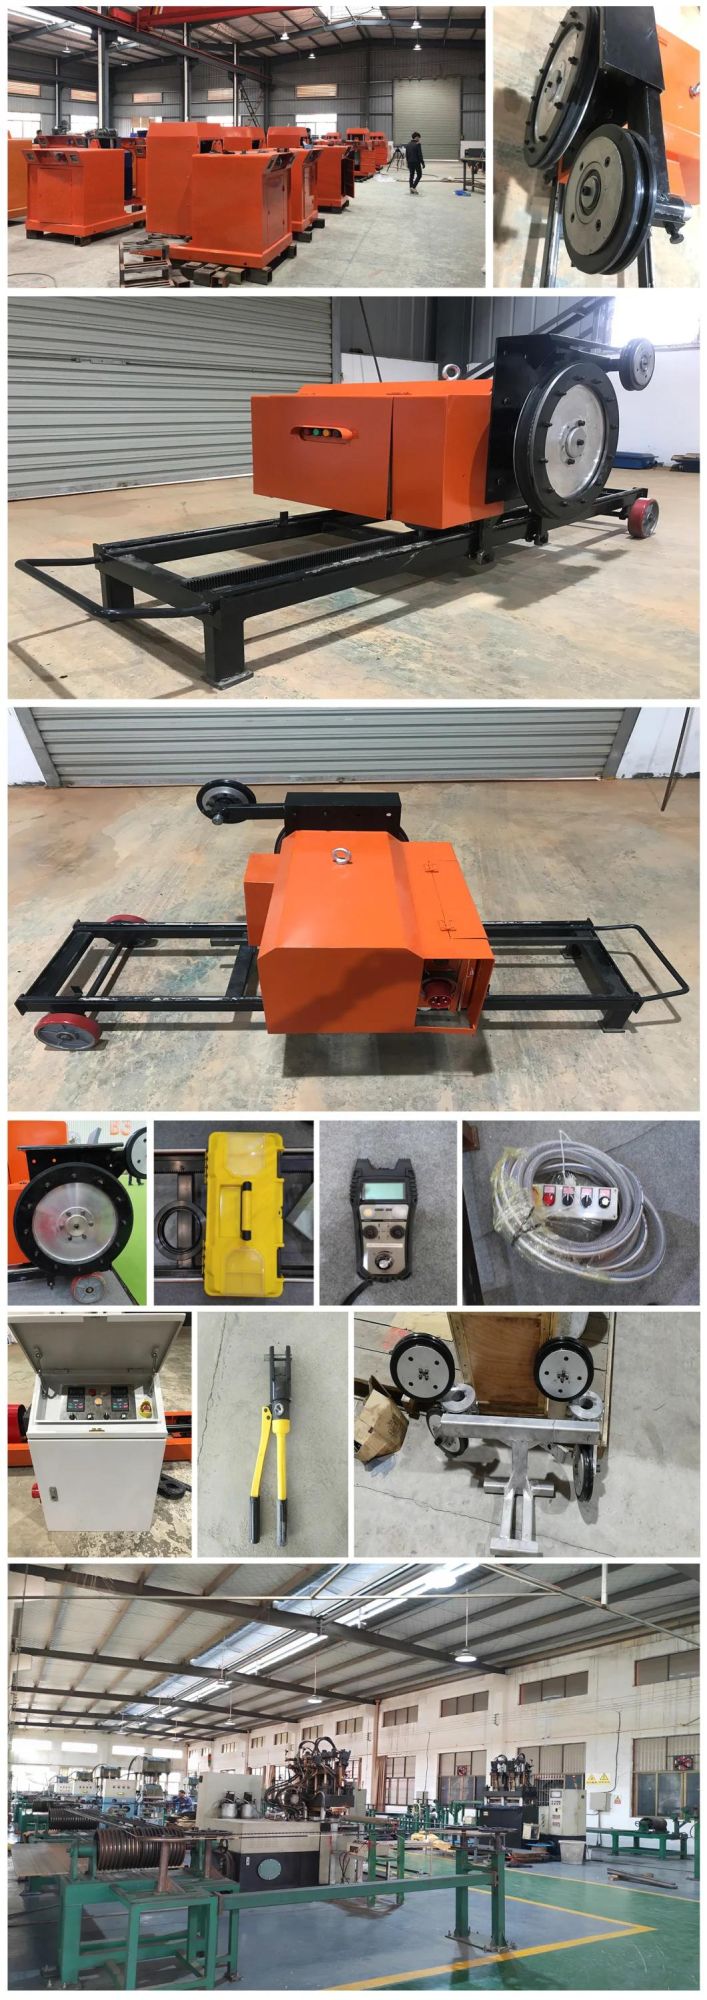 Fast Cutting Machine, Wire Saw Cutter for Reinforced Concrete Structure Demolition